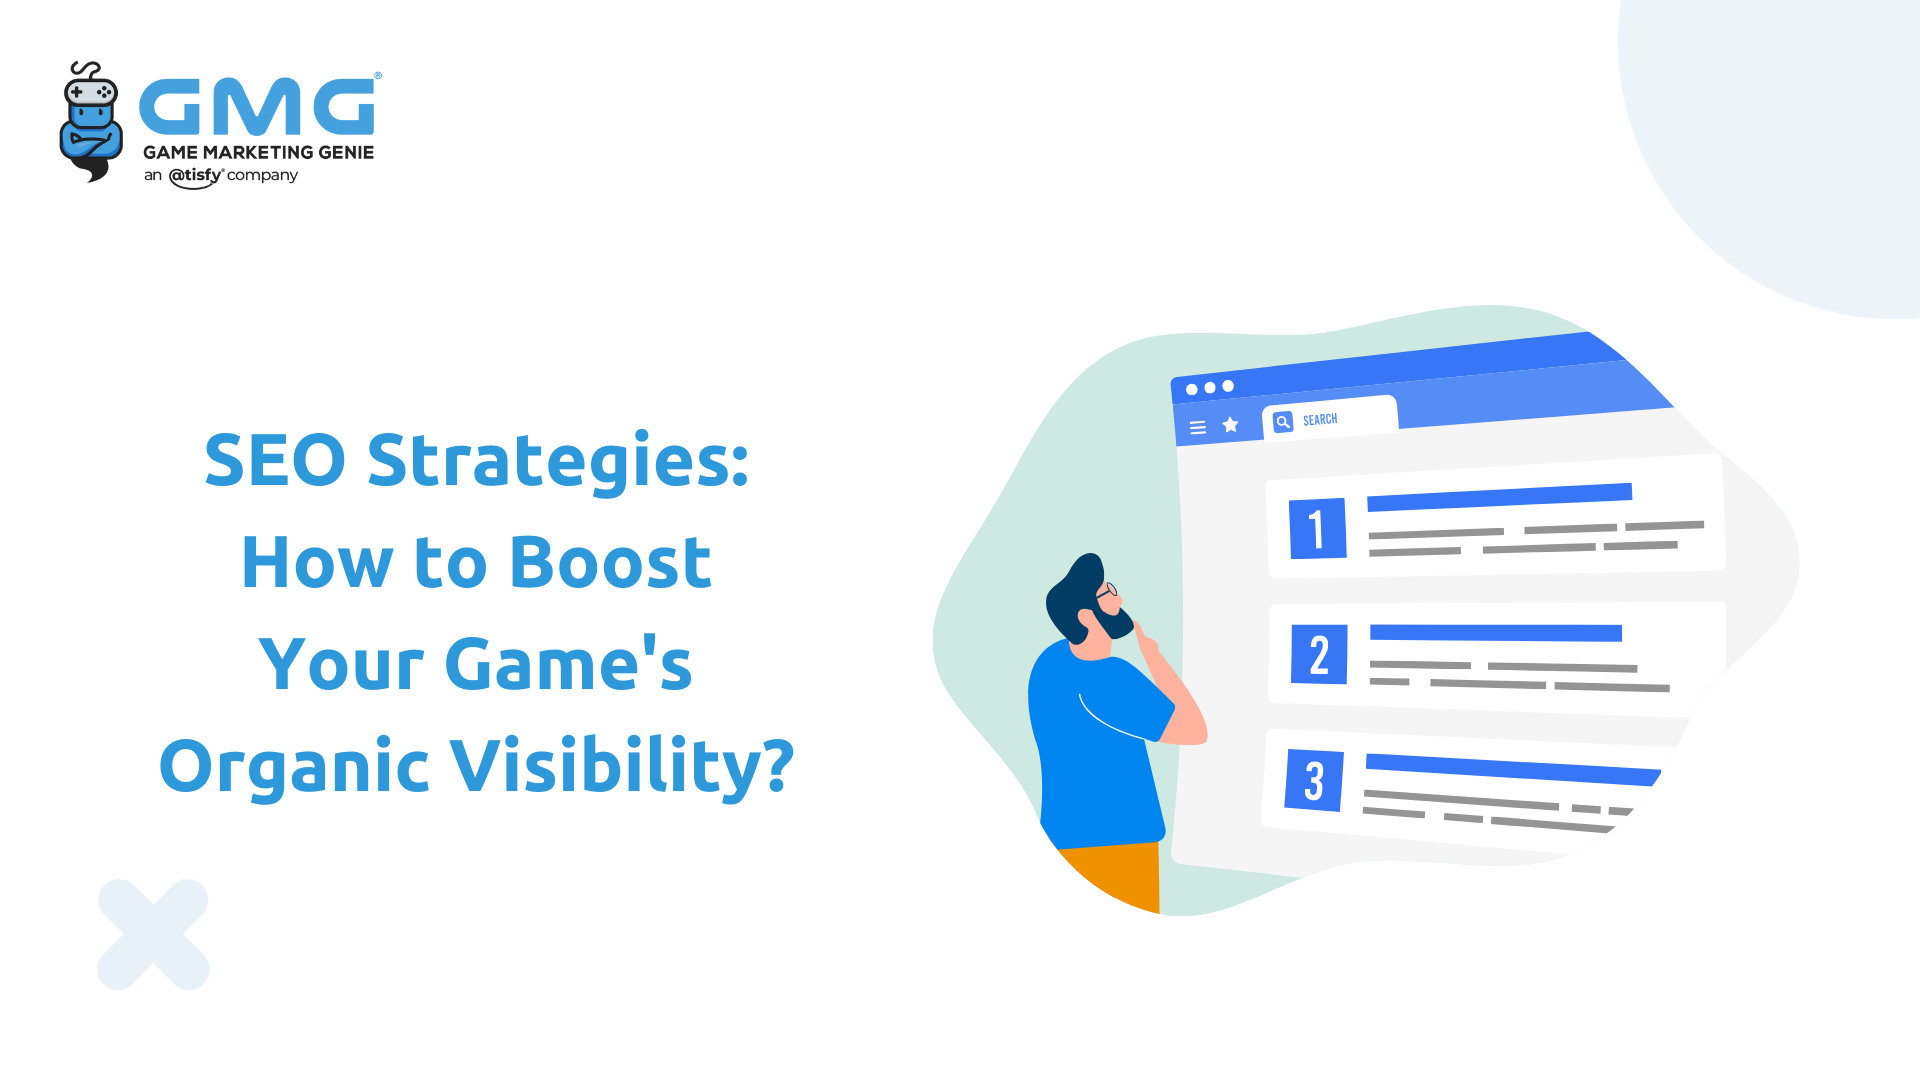 SEO Strategies: How to Boost Your Game's Organic Visibility?